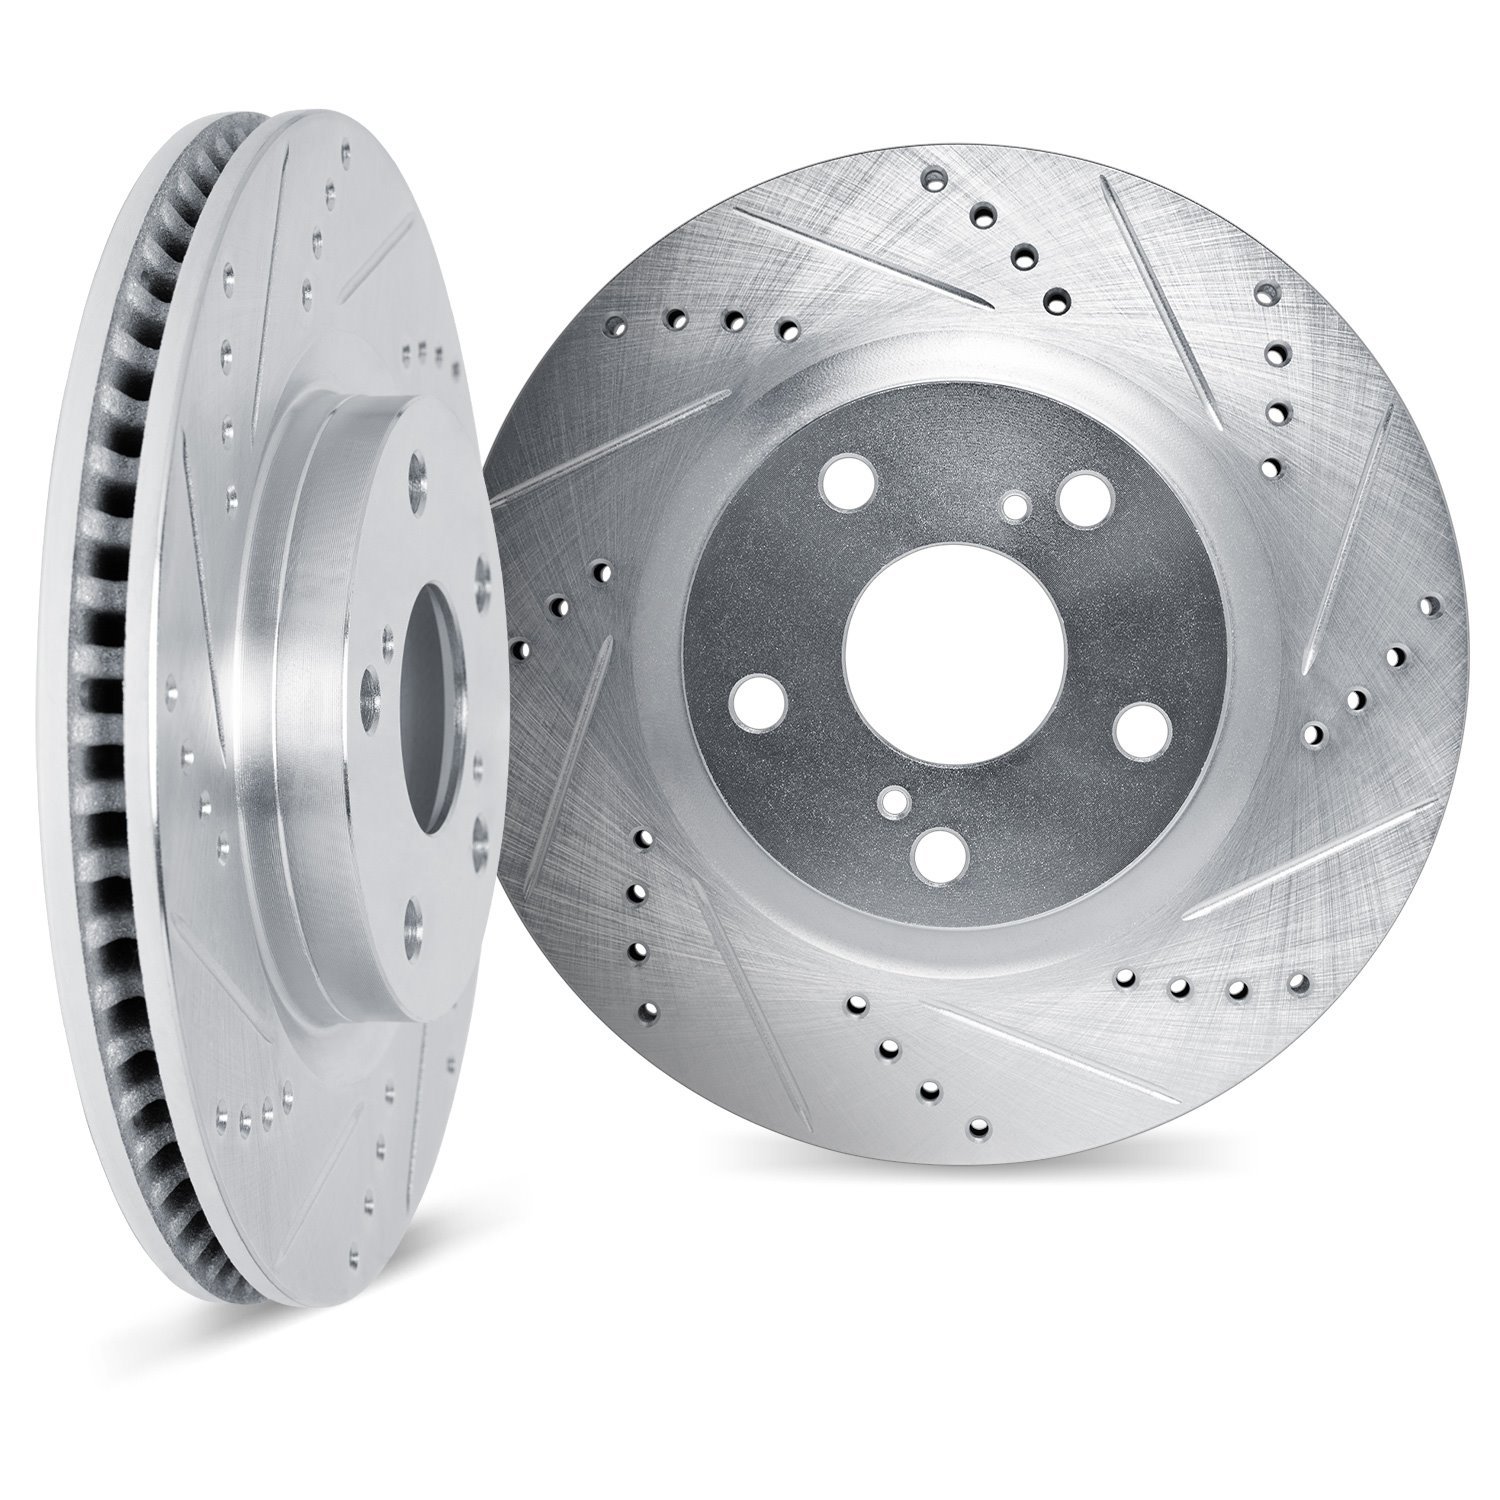 7002-01007 Drilled/Slotted Brake Rotors [Silver], 1996-1998 Suzuki, Position: Front